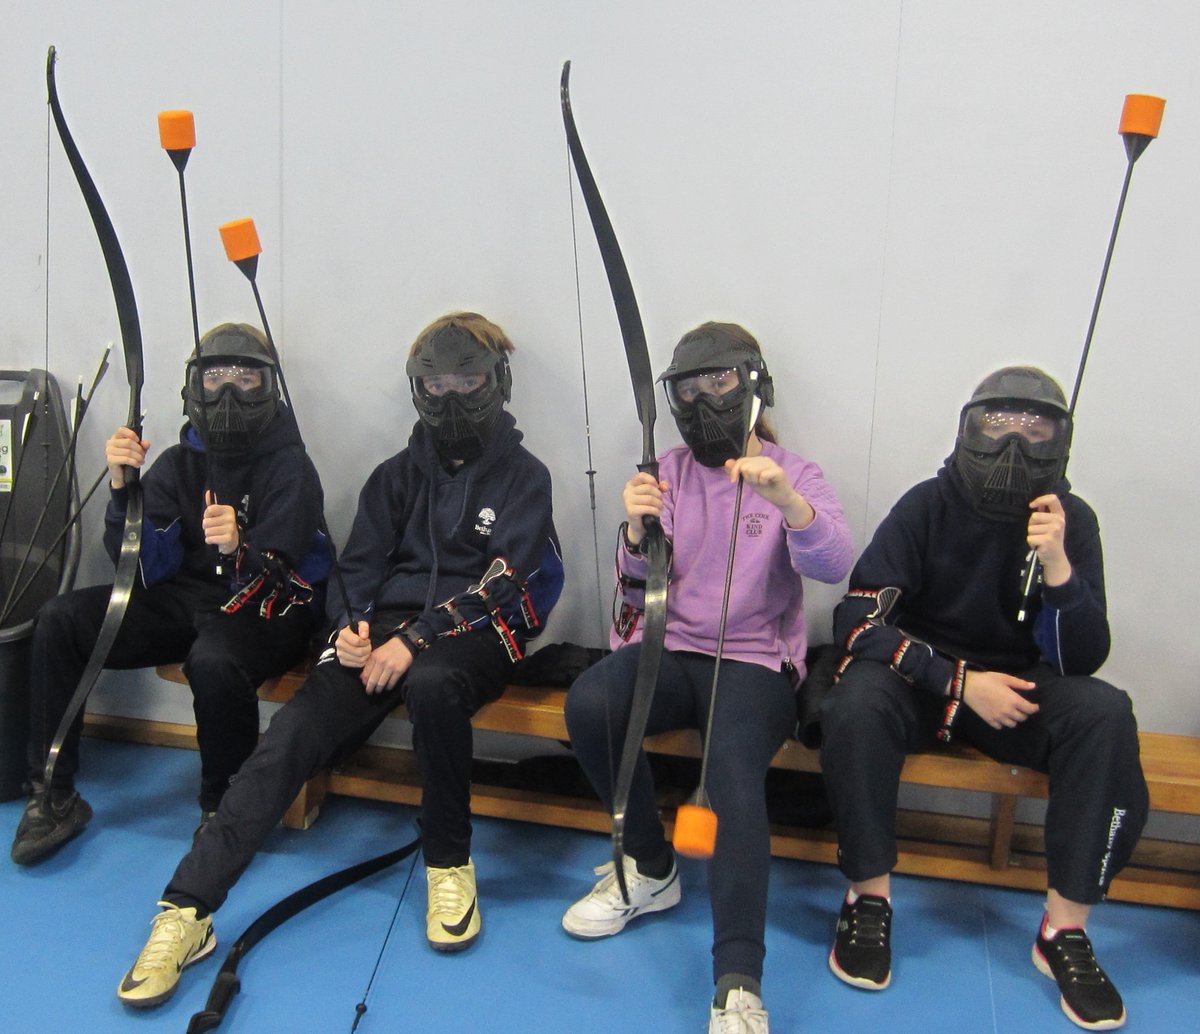 As part of the Bethany enrichment programme, pupils have the opportunity to explore their inner archer in a tag archery showdown! Points are scored for hitting targets, tagging opponents, and even catching arrows mid-air. Find out more 👉 hubs.la/Q02vk7b00 #bethanyschool